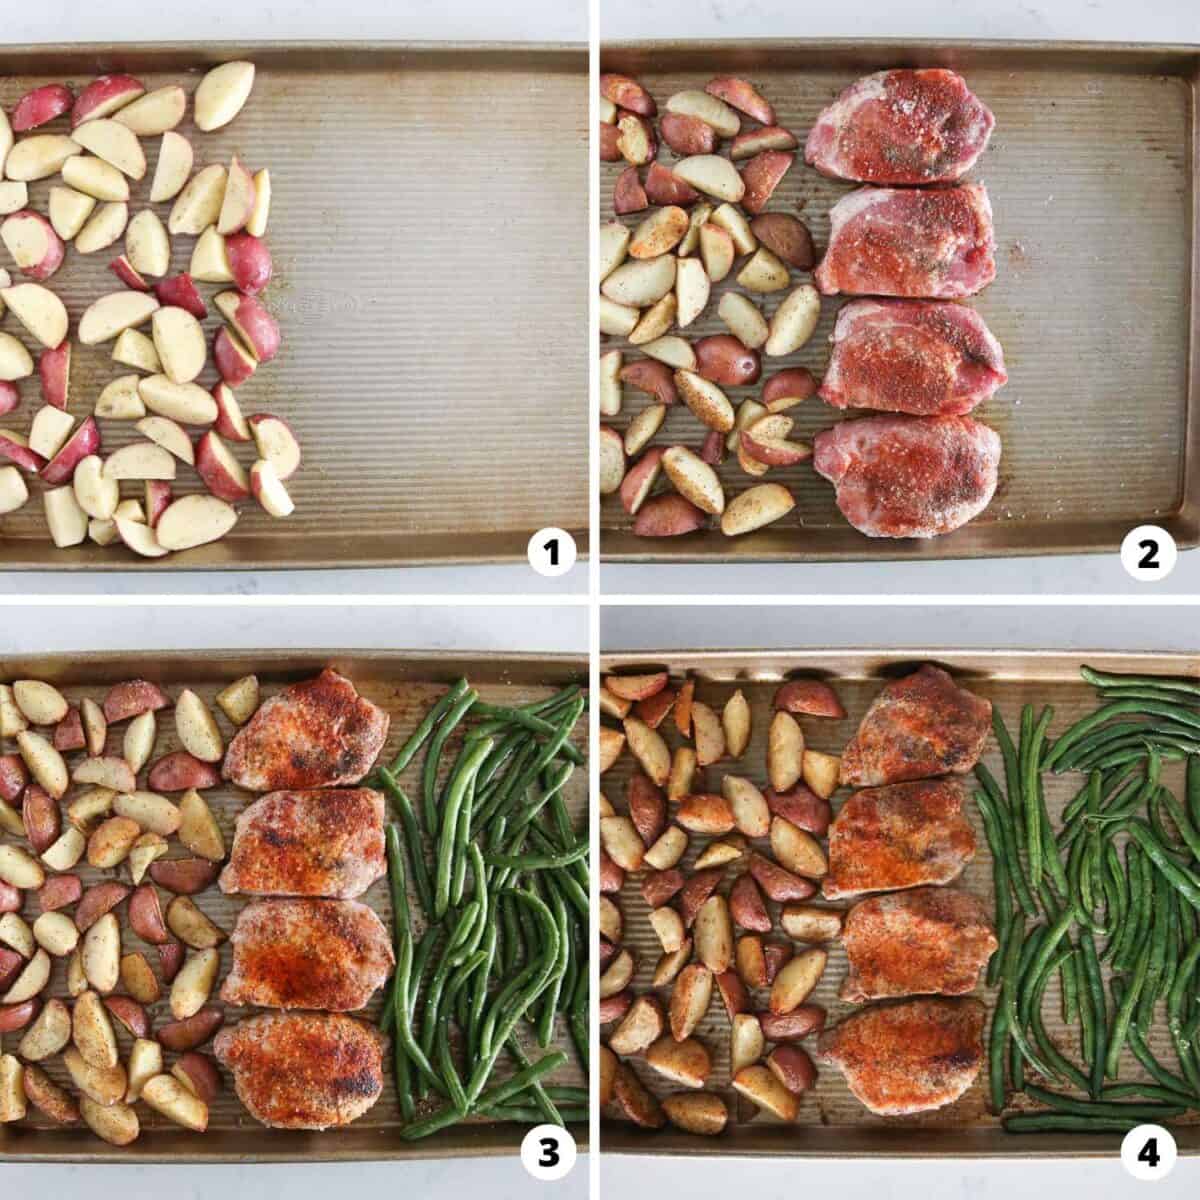 Showing how to make sheet pan pork chops in a 4 step collage.